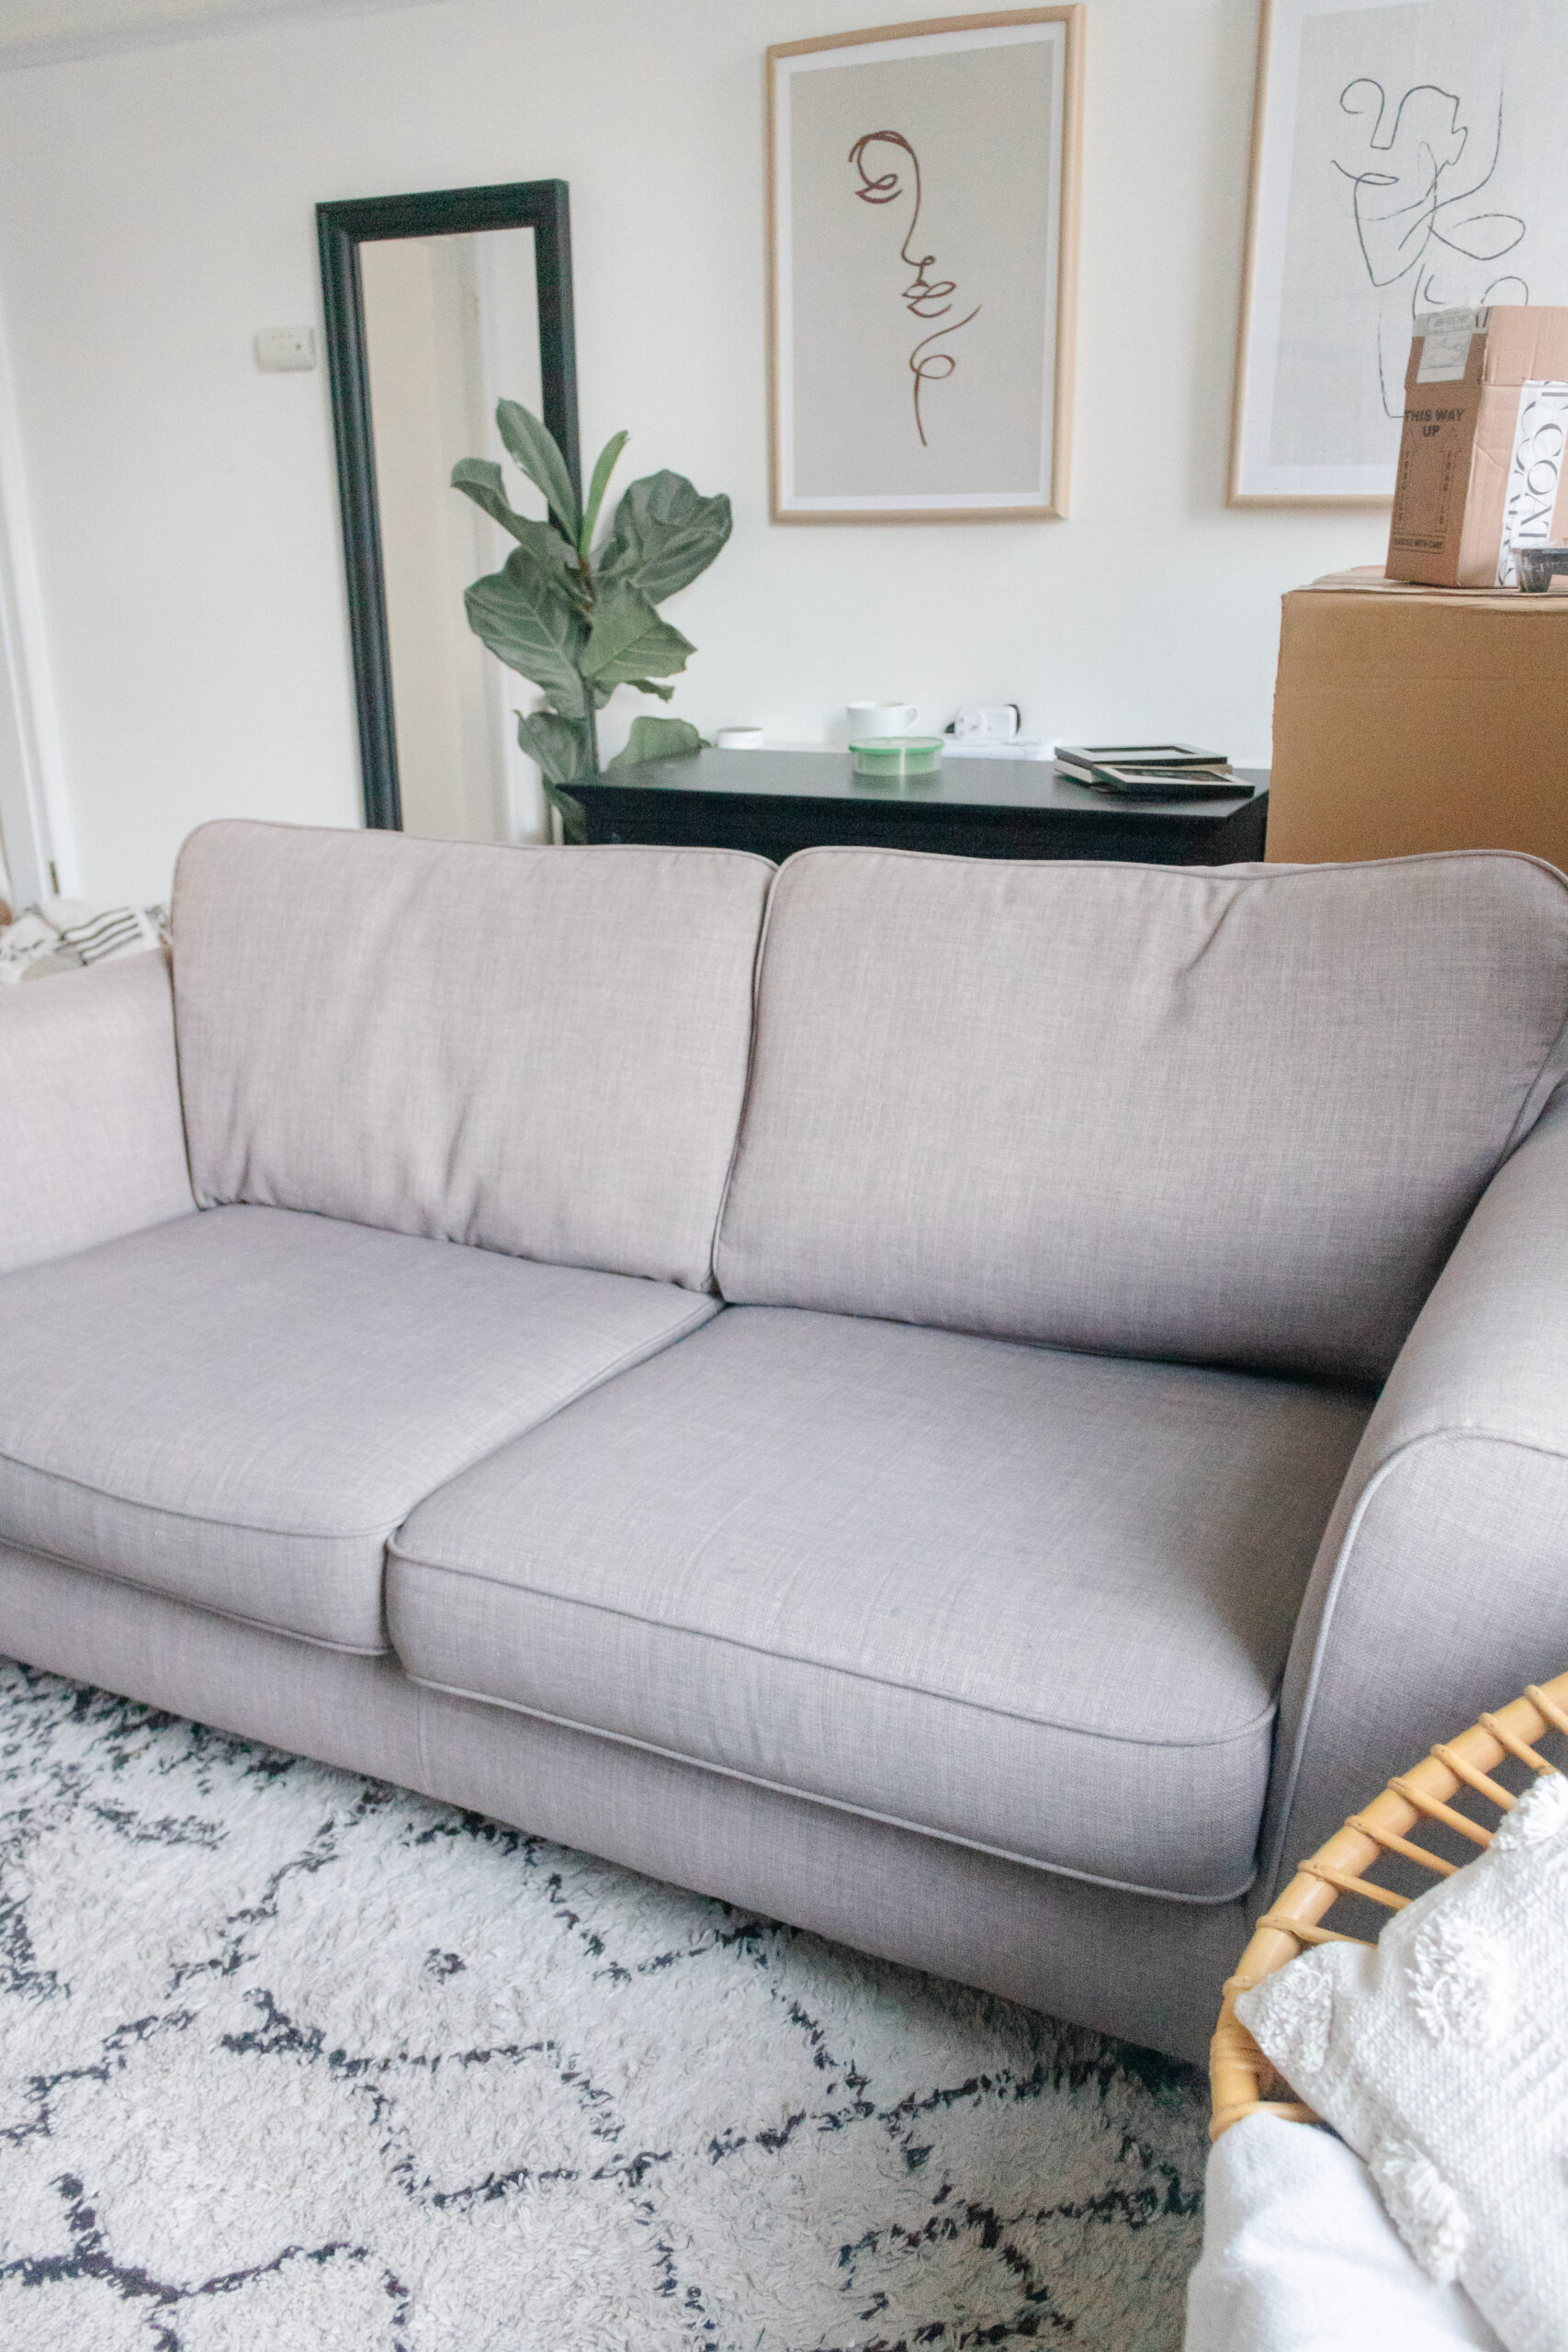 How to Restuff Couch Cushions